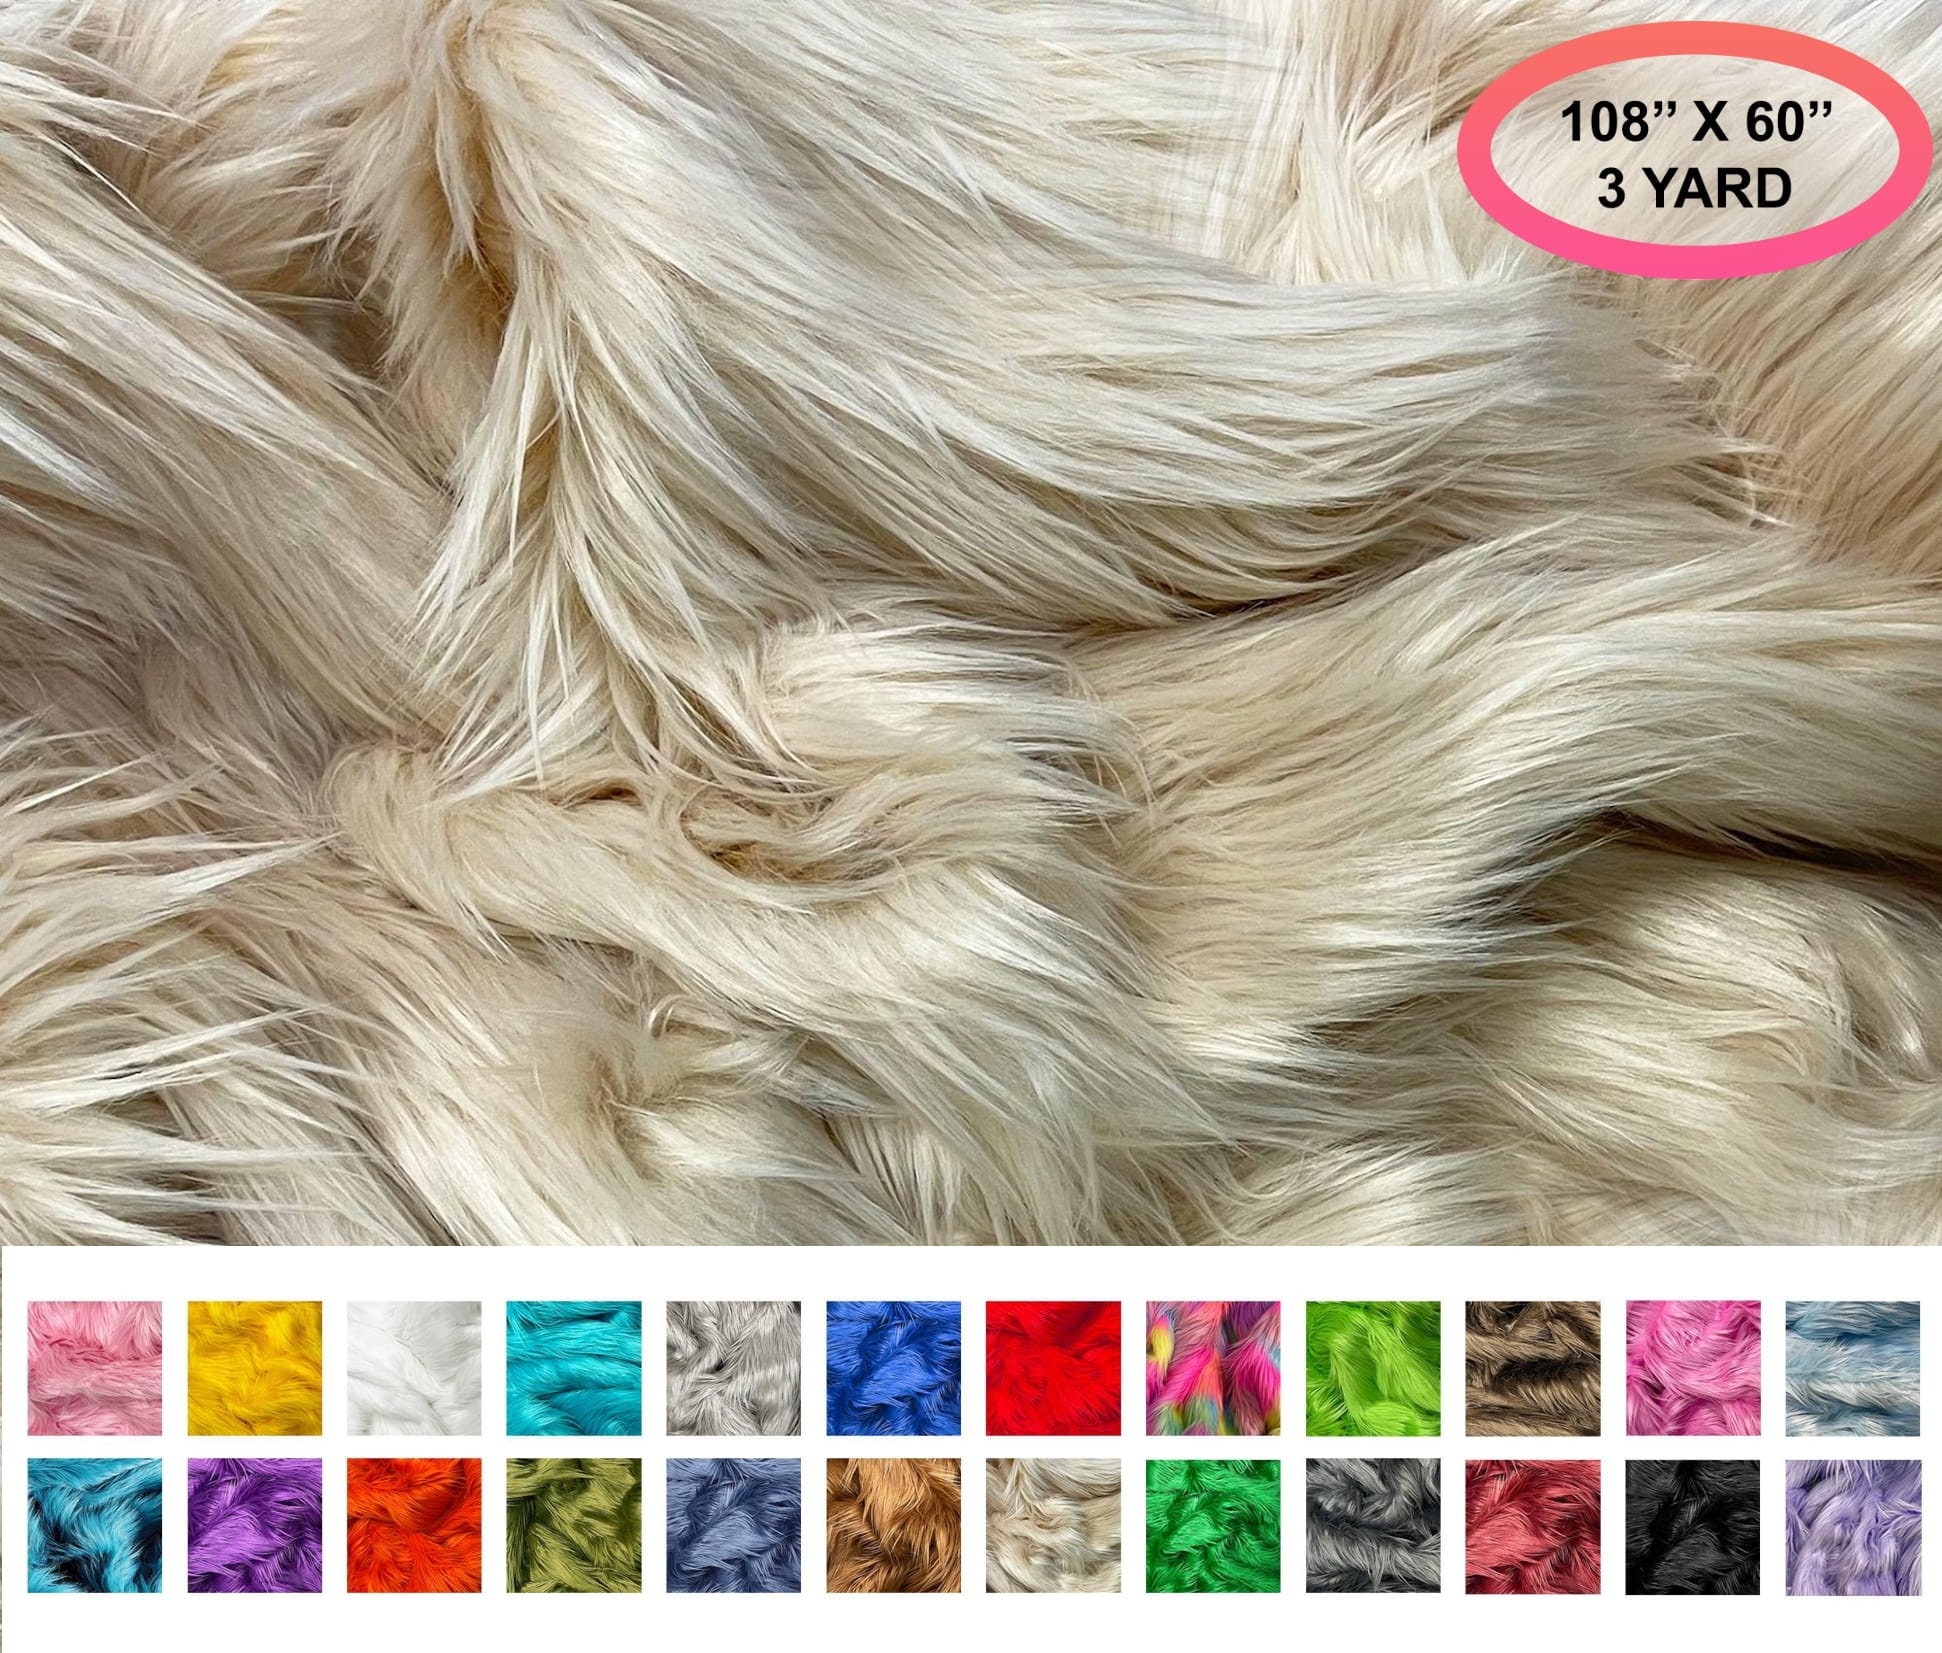 Eovea - Shaggy Faux Fur Fabric - One Yard - 60 X 36 Inches - DIY Craft  Supply, Hobby, Costume, Decoration,Vests,Rug,Pillow,Coats,Blanket